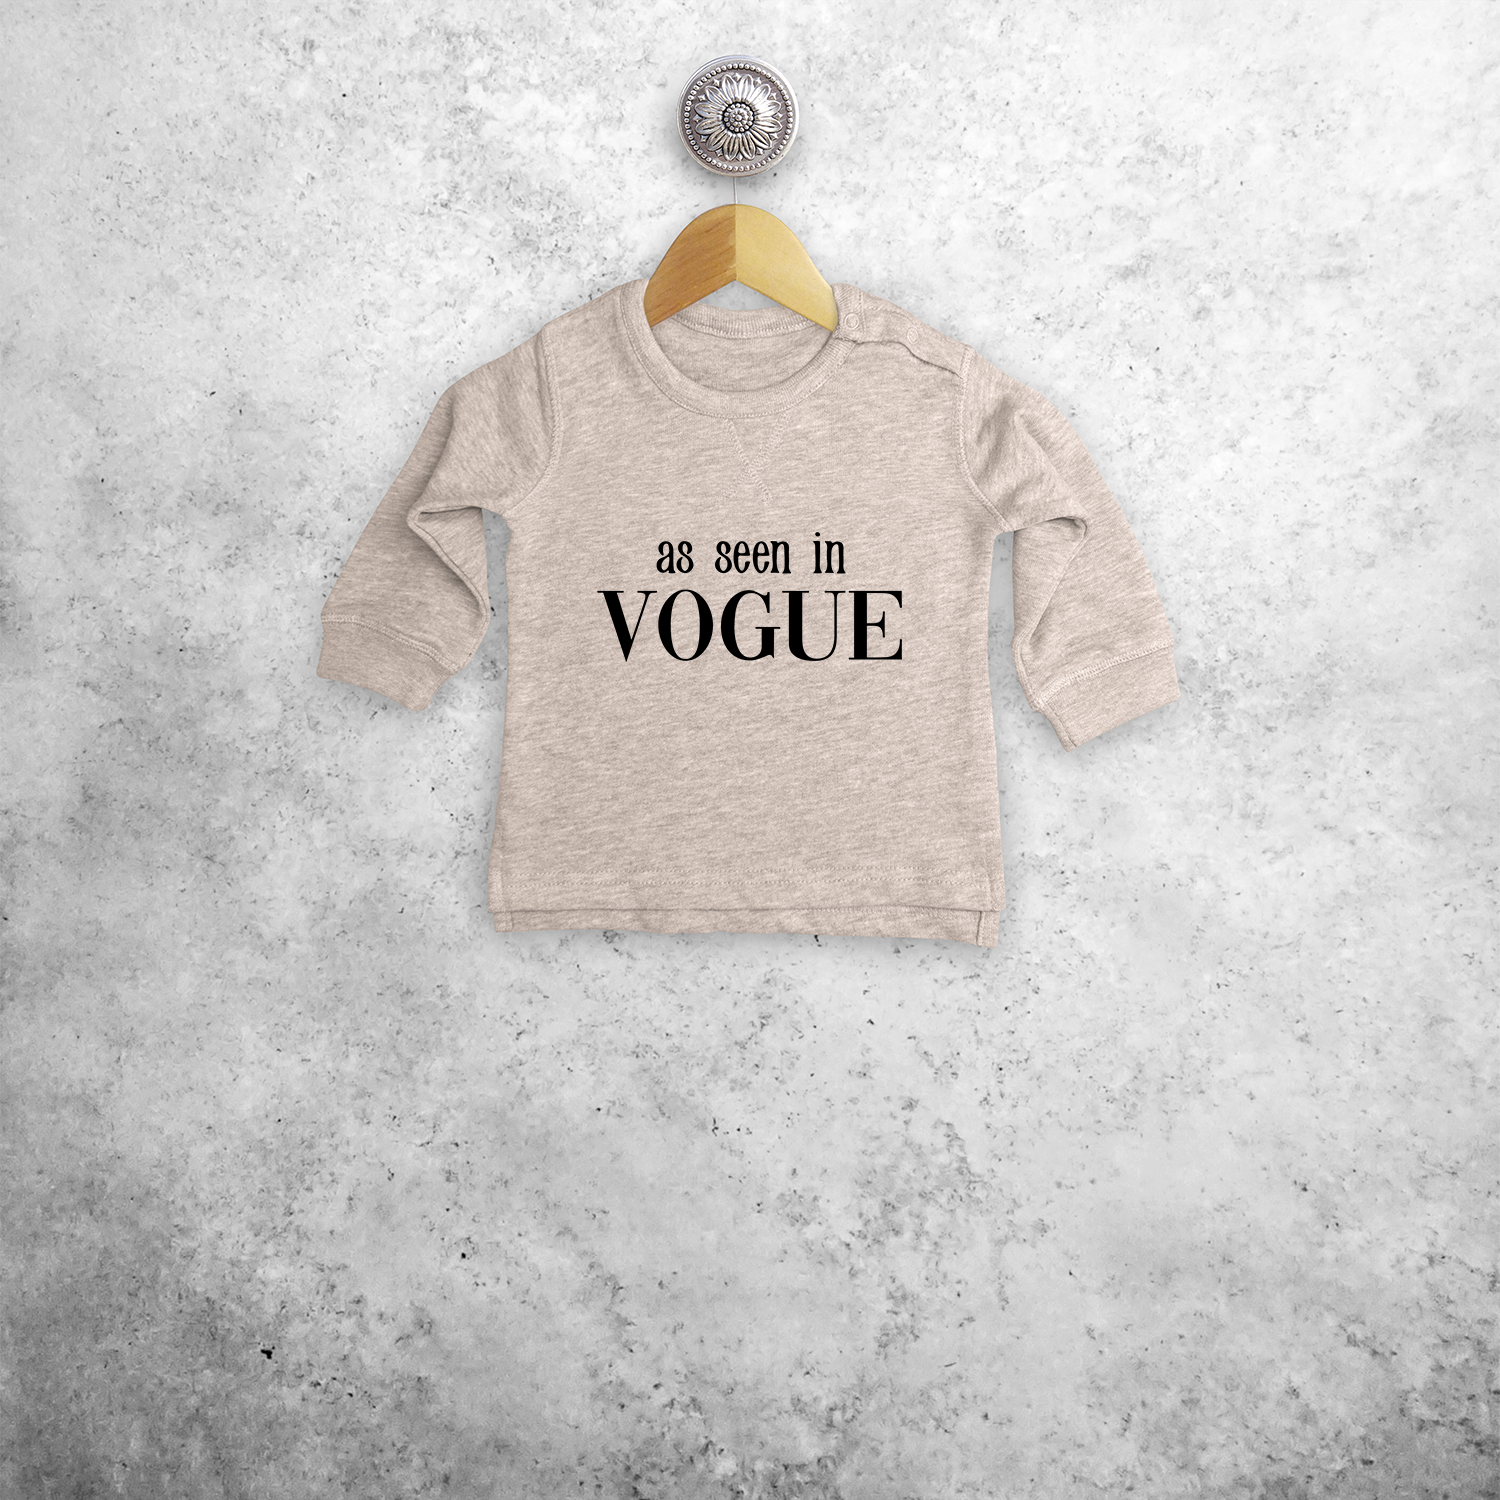 'As seen in Vogue' baby sweater